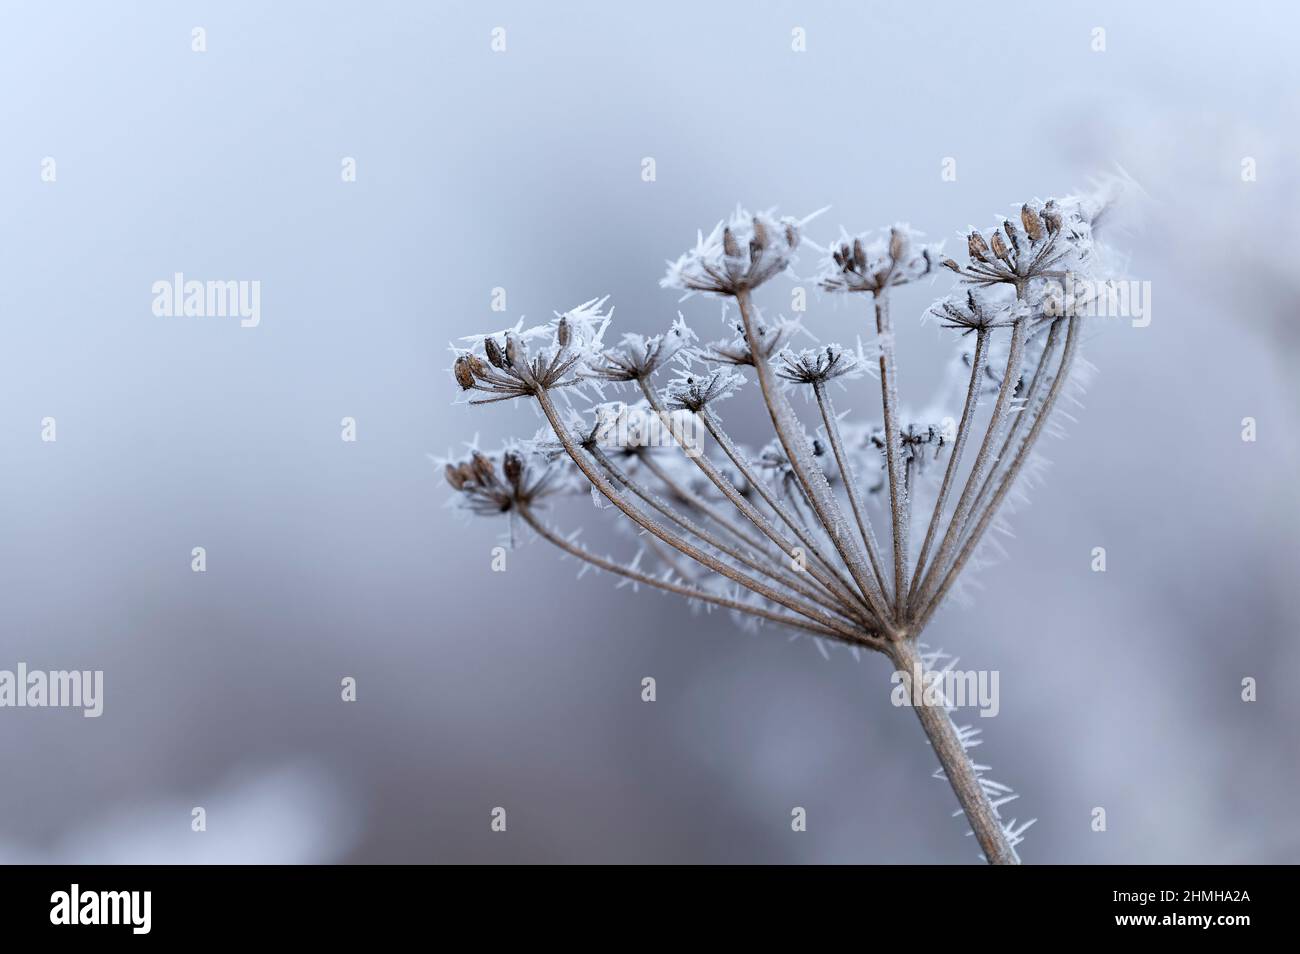 Hoar frost covers a dried up umbel of fennel, Germany, Baden-Wuerttemberg Stock Photo